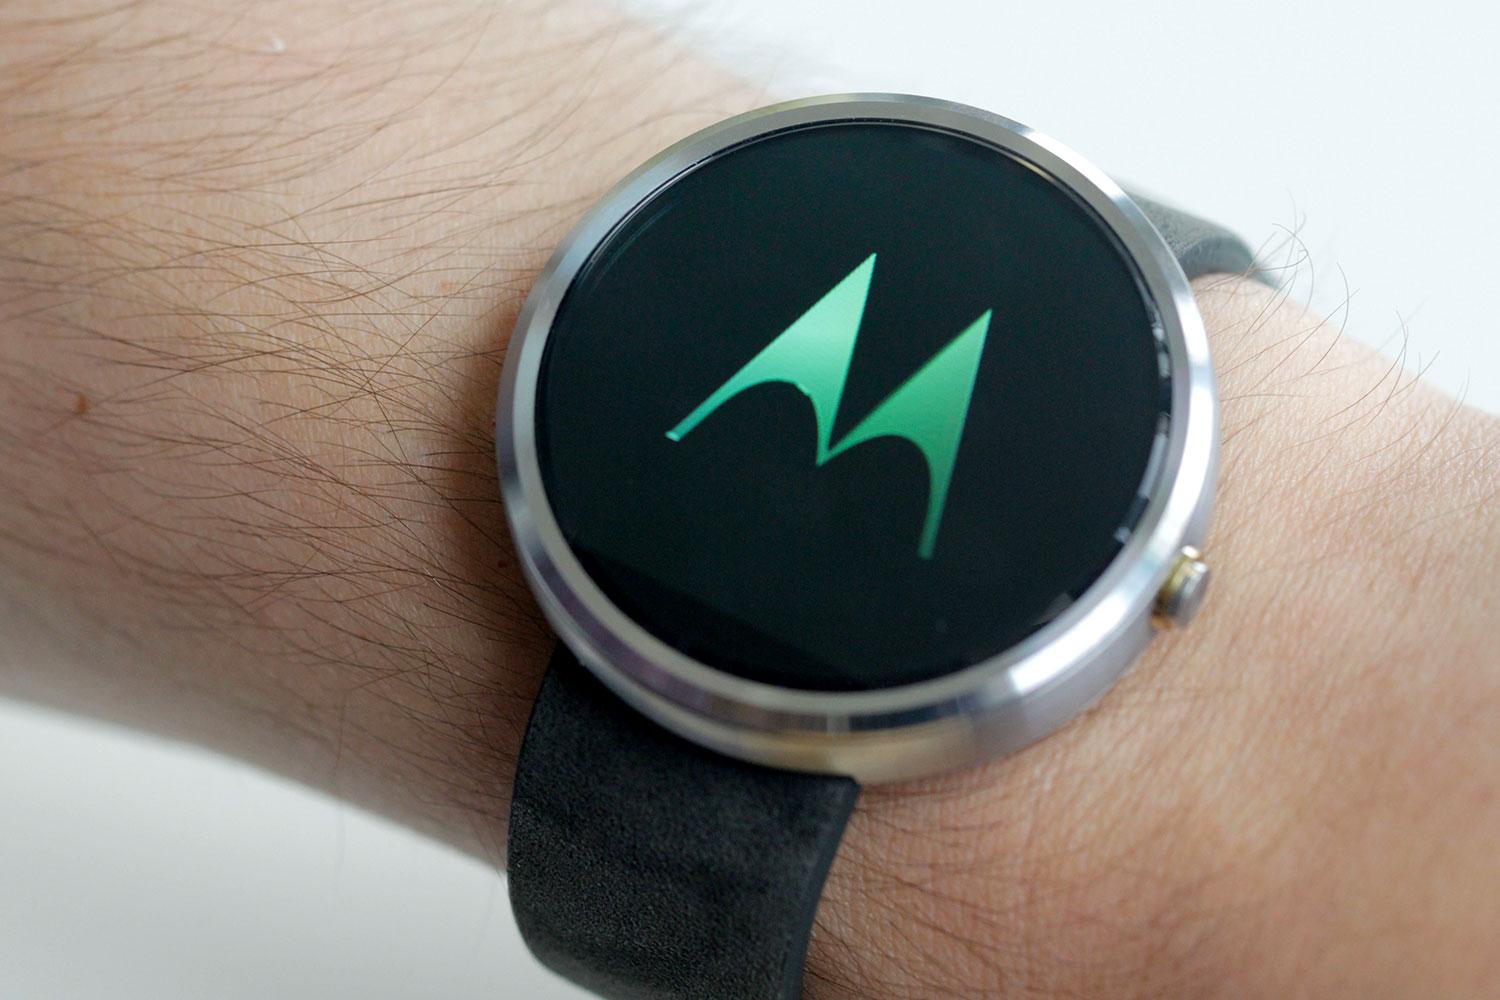 Moto 360 Watch Release Date Approaches: Will Motorola Charge Premium Price  For A Sapphire Smartwatch? Rumored Specs, Leaked Photos Surface | IBTimes